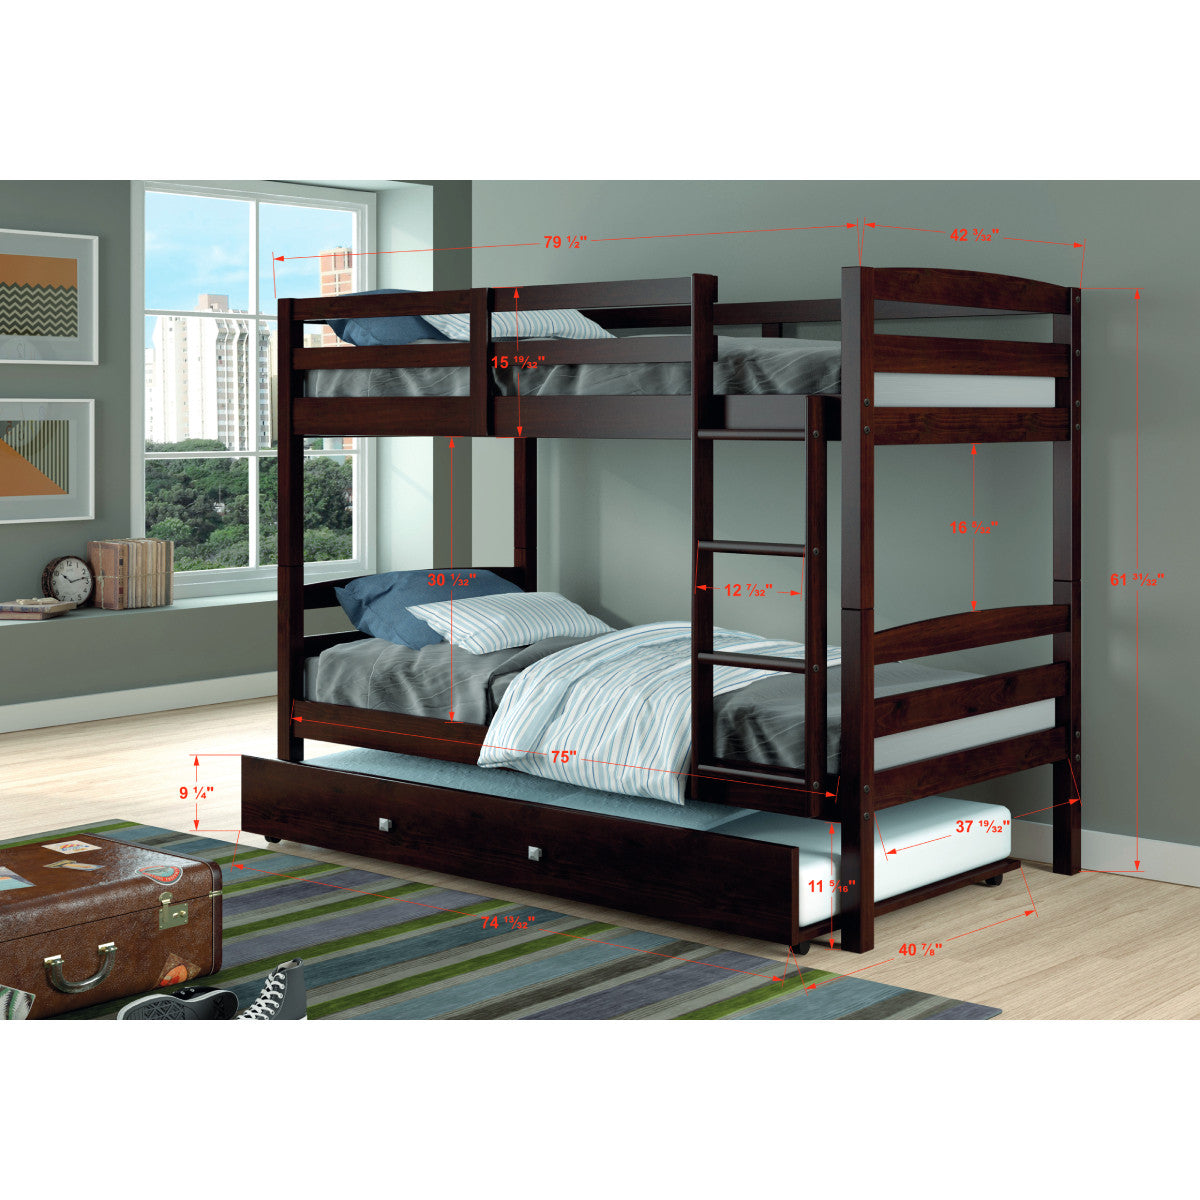 TWIN/TWIN DEVON BUNK BED WITH TRUNDLE BED IN DARK CAPPUCCINO FINISH